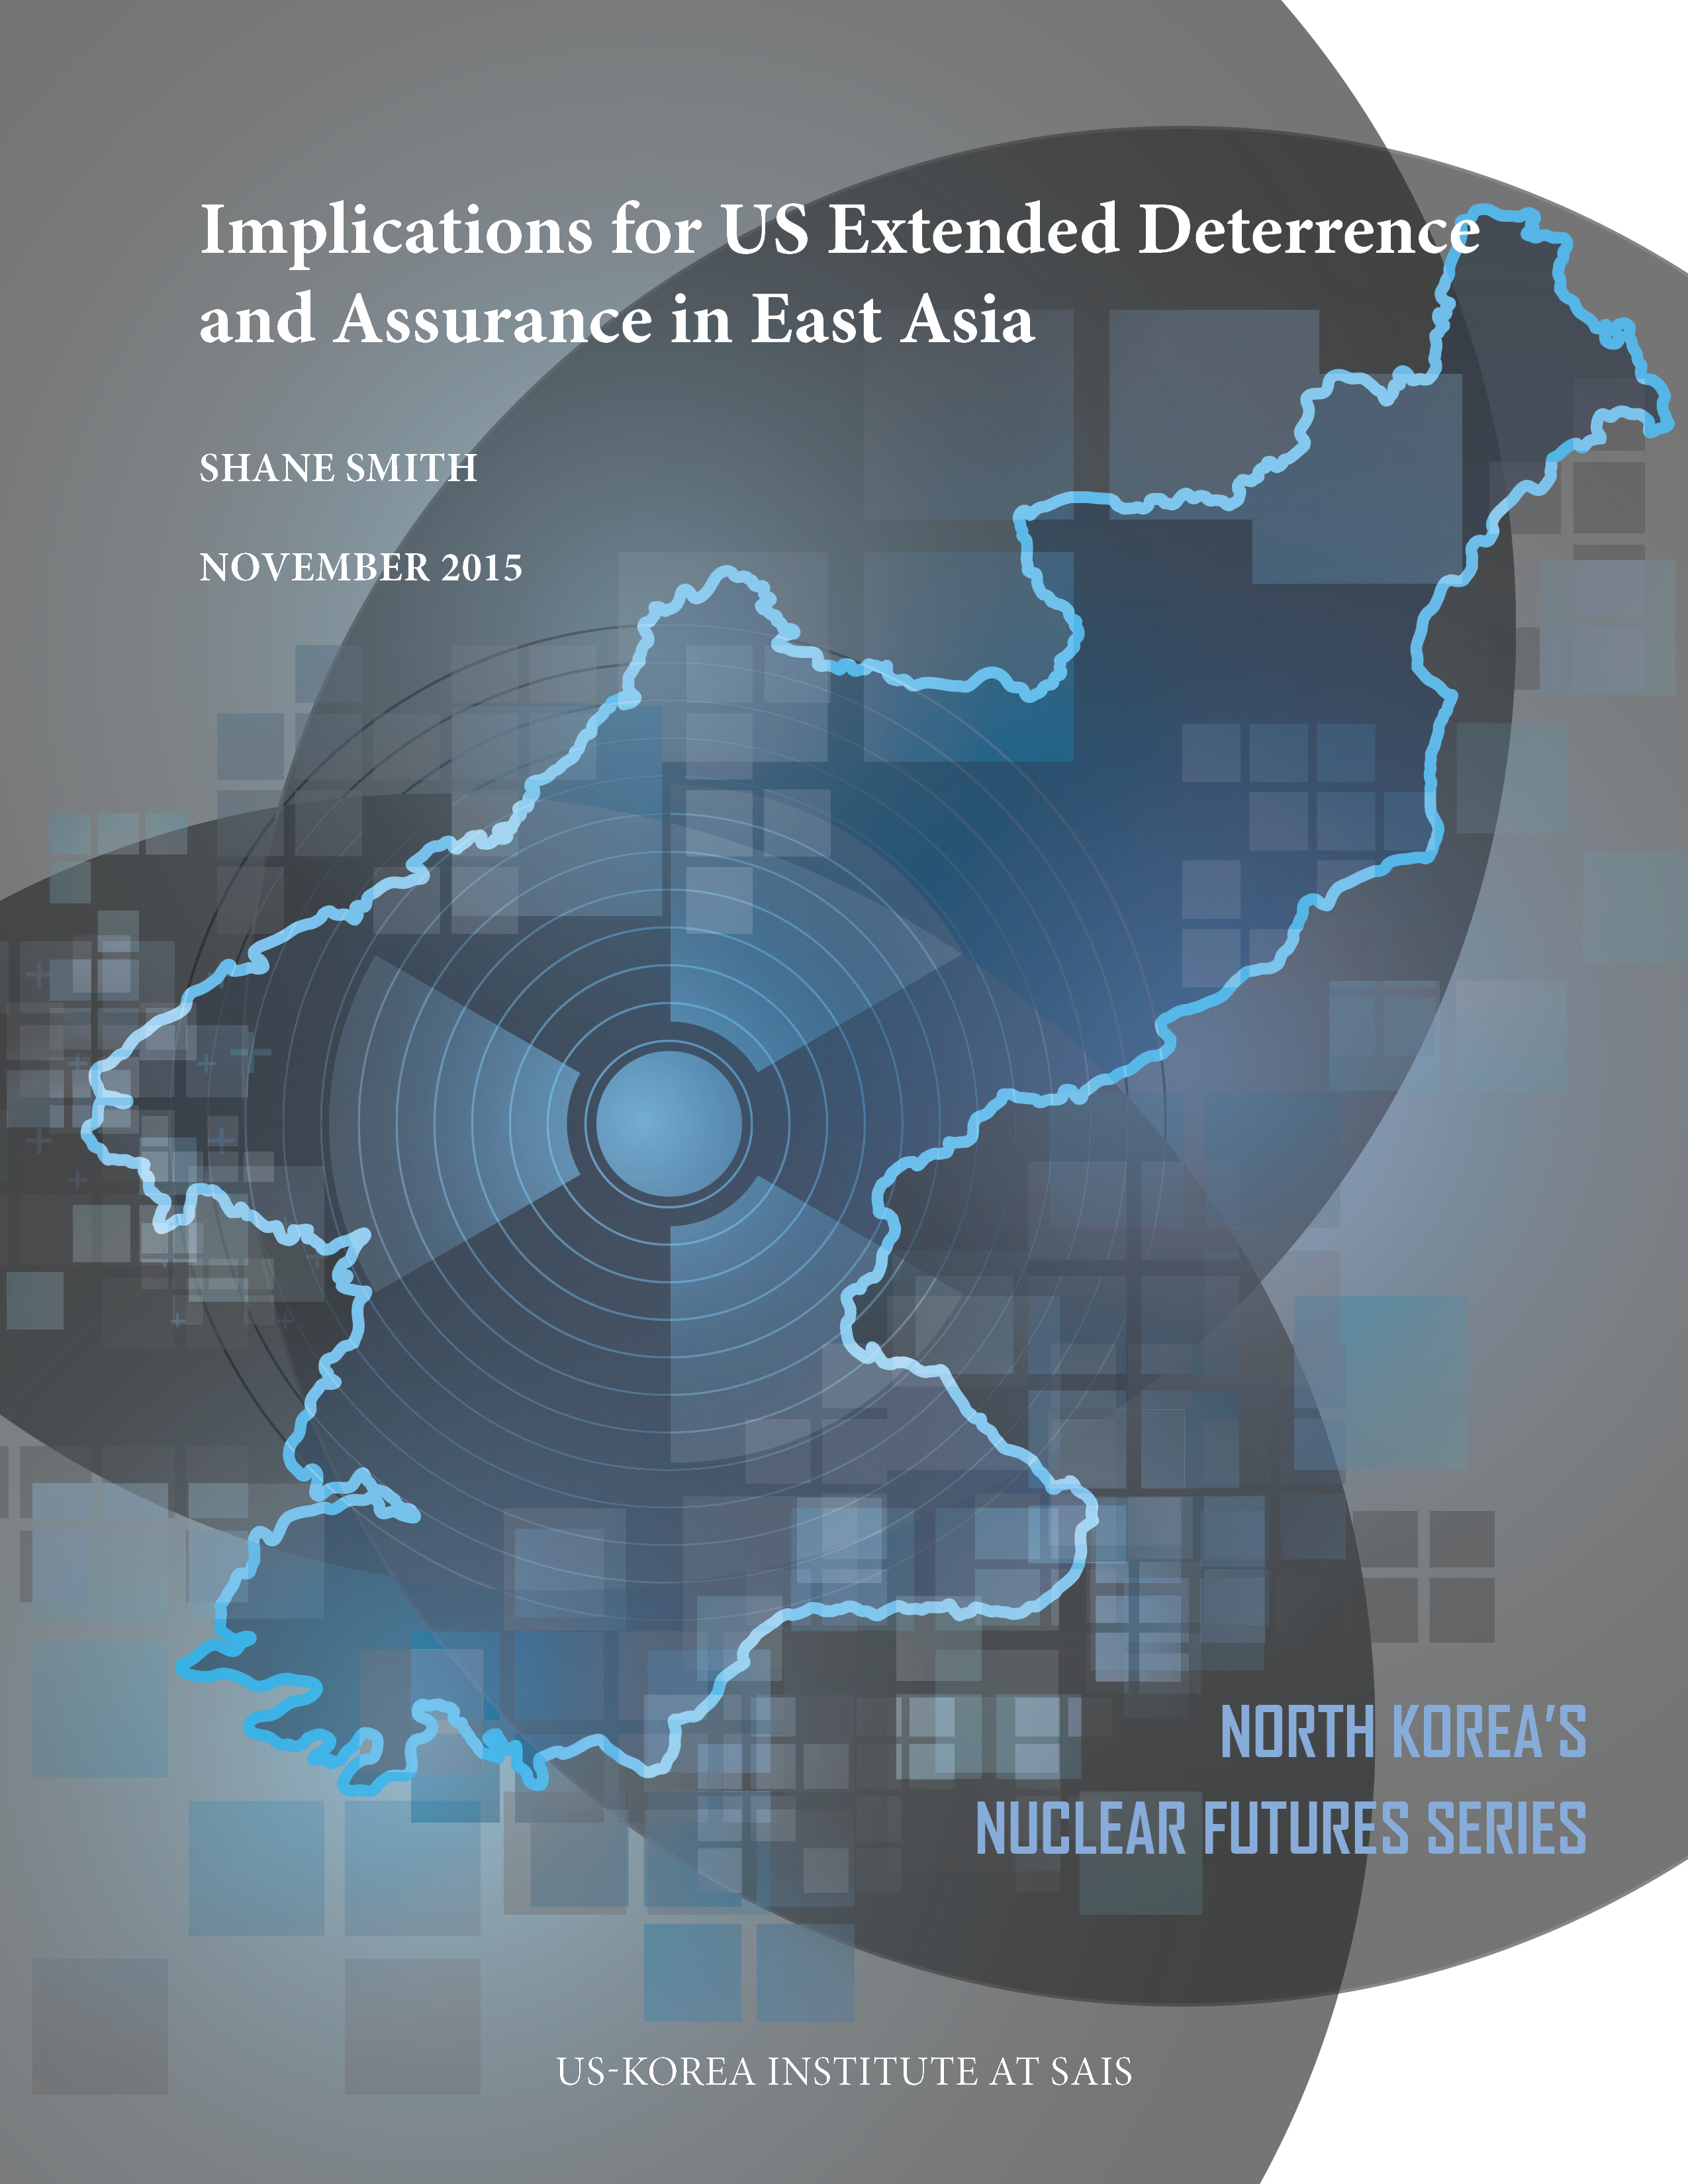 Implications for US Extended Deterrence and Assurance in East Asia